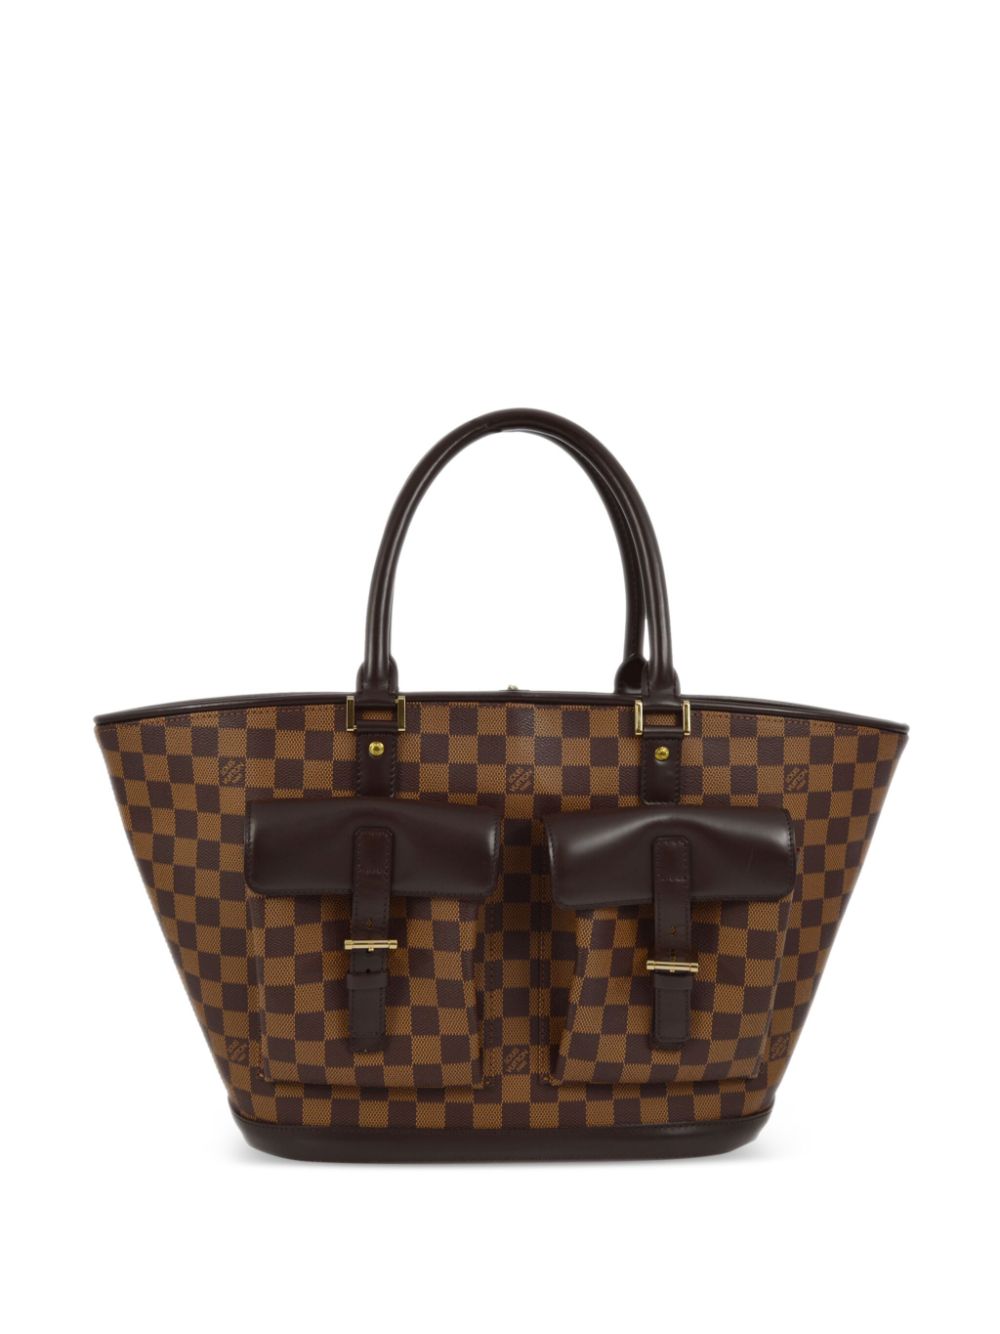 Pre-owned Louis Vuitton 2003 Manosque Gm Tote Bag In Brown